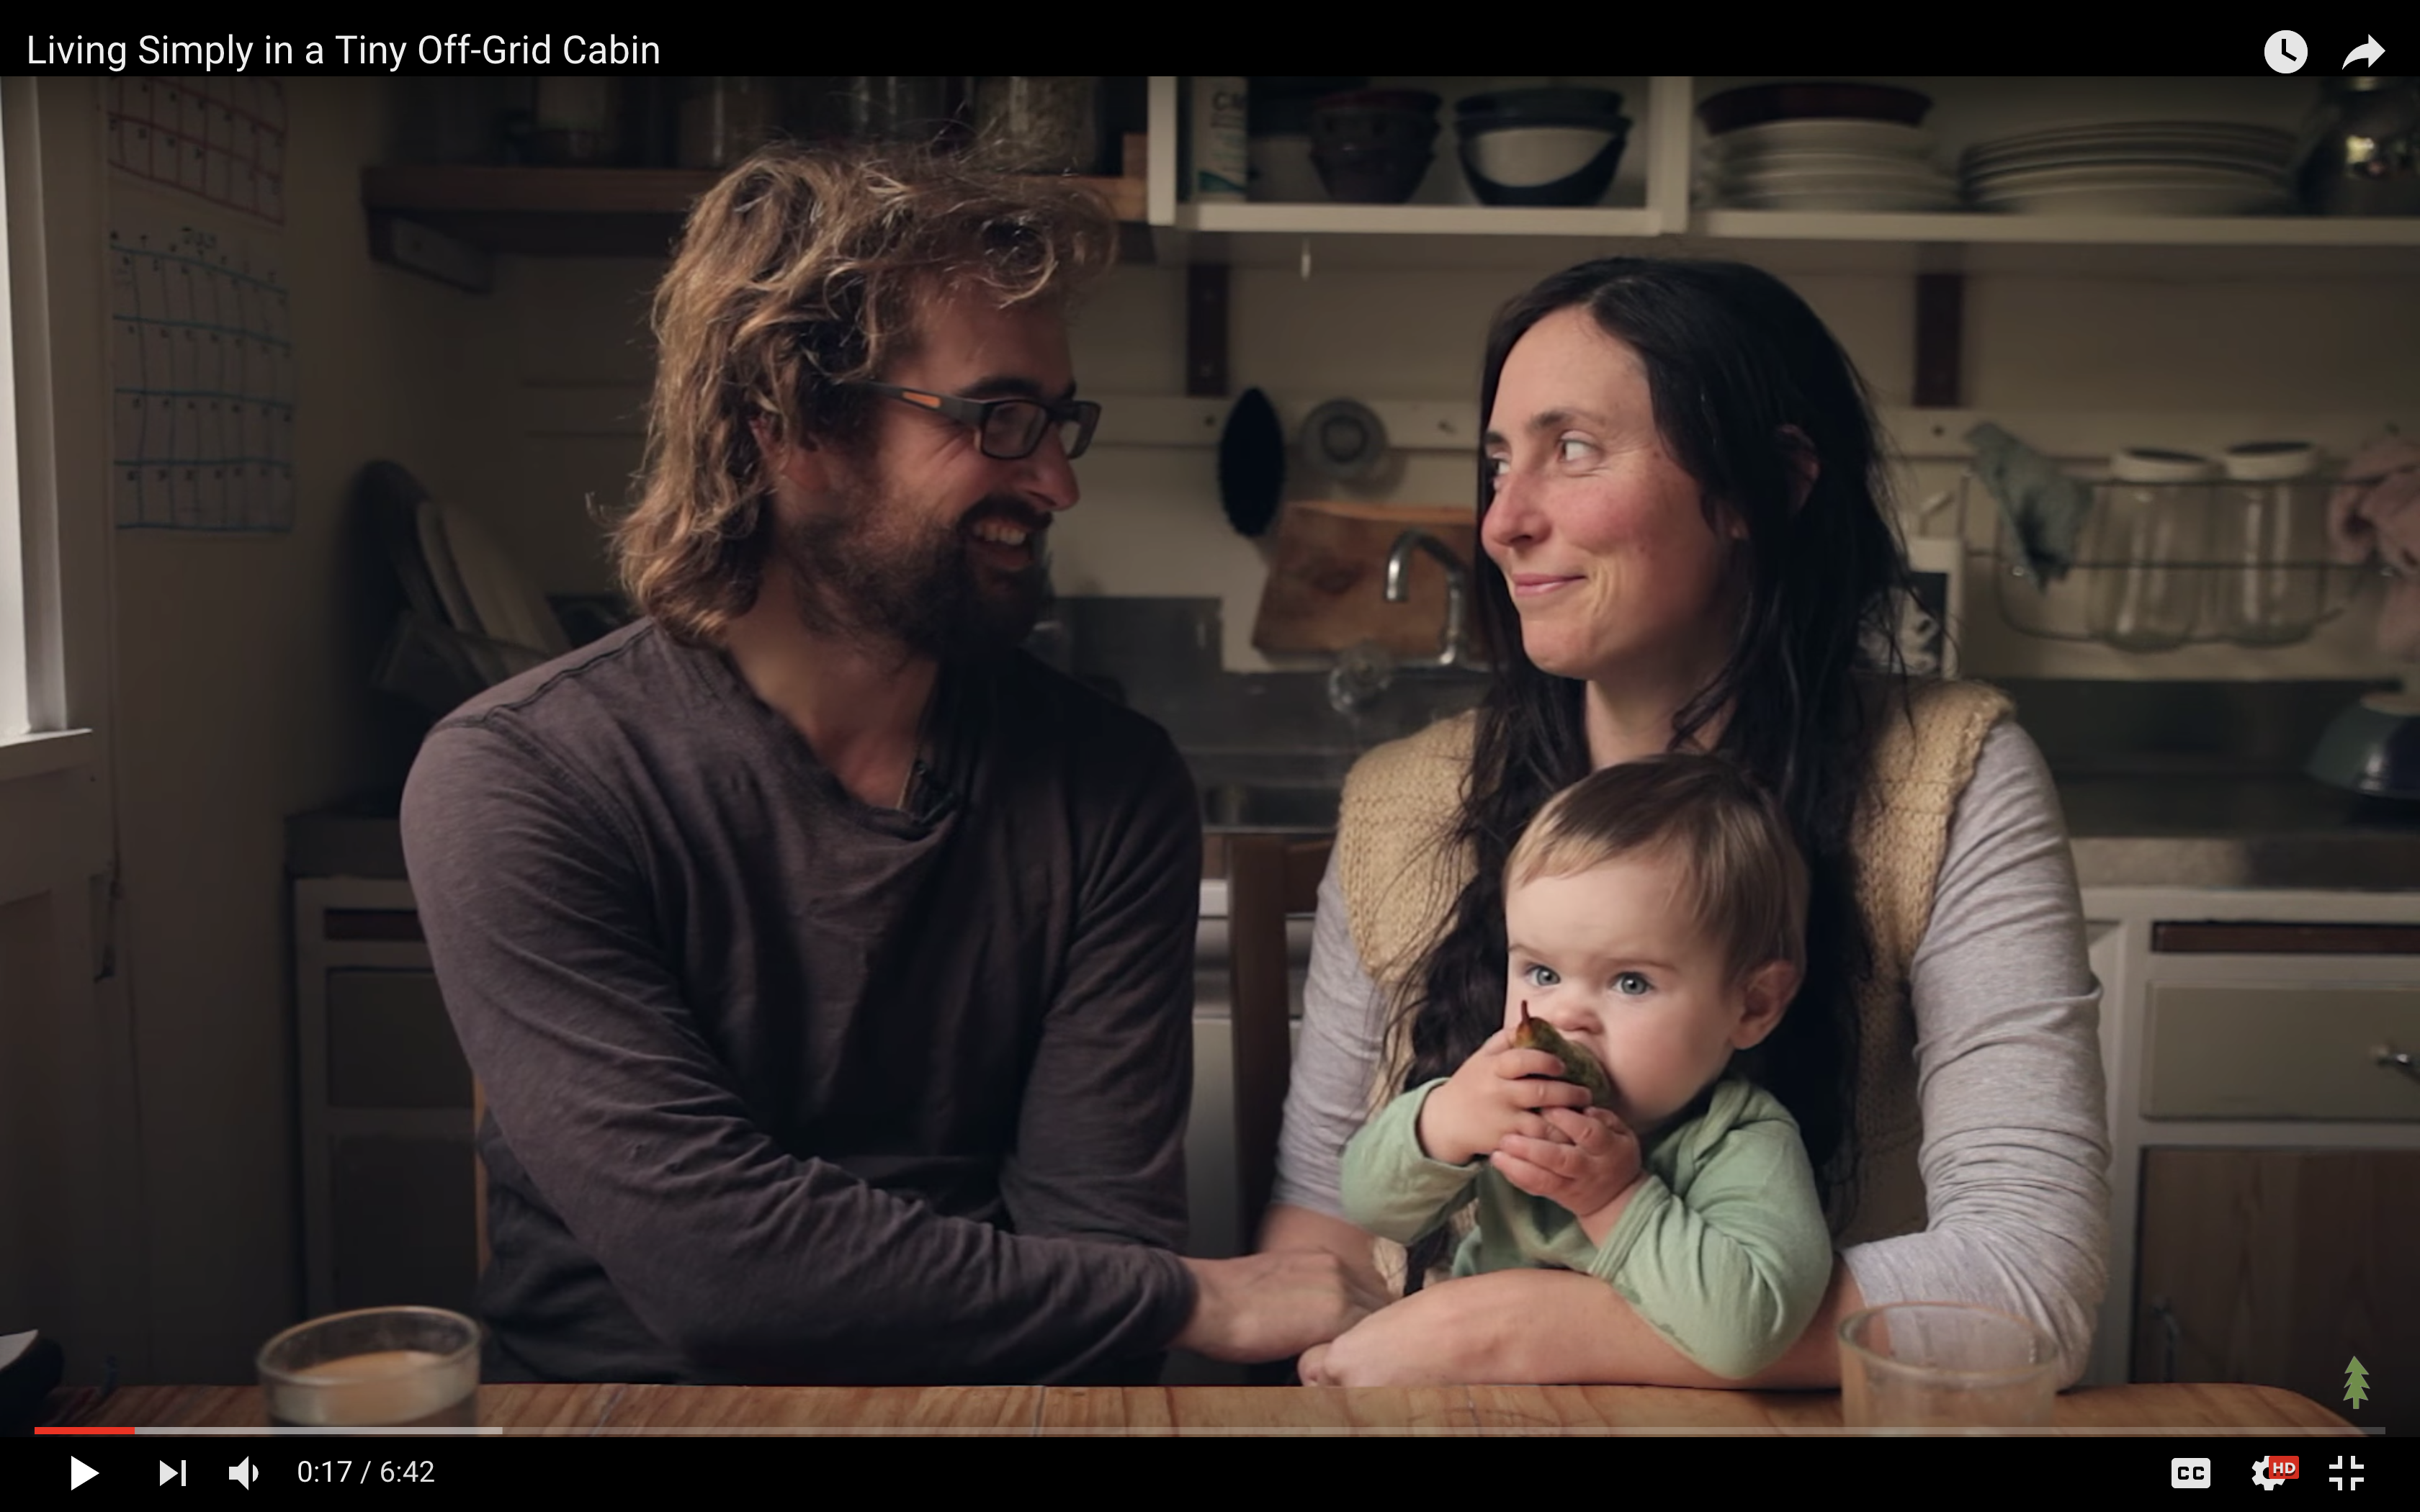 Holistic doctor quits job, family moves to 20 sq meter tiny cabin off the grid